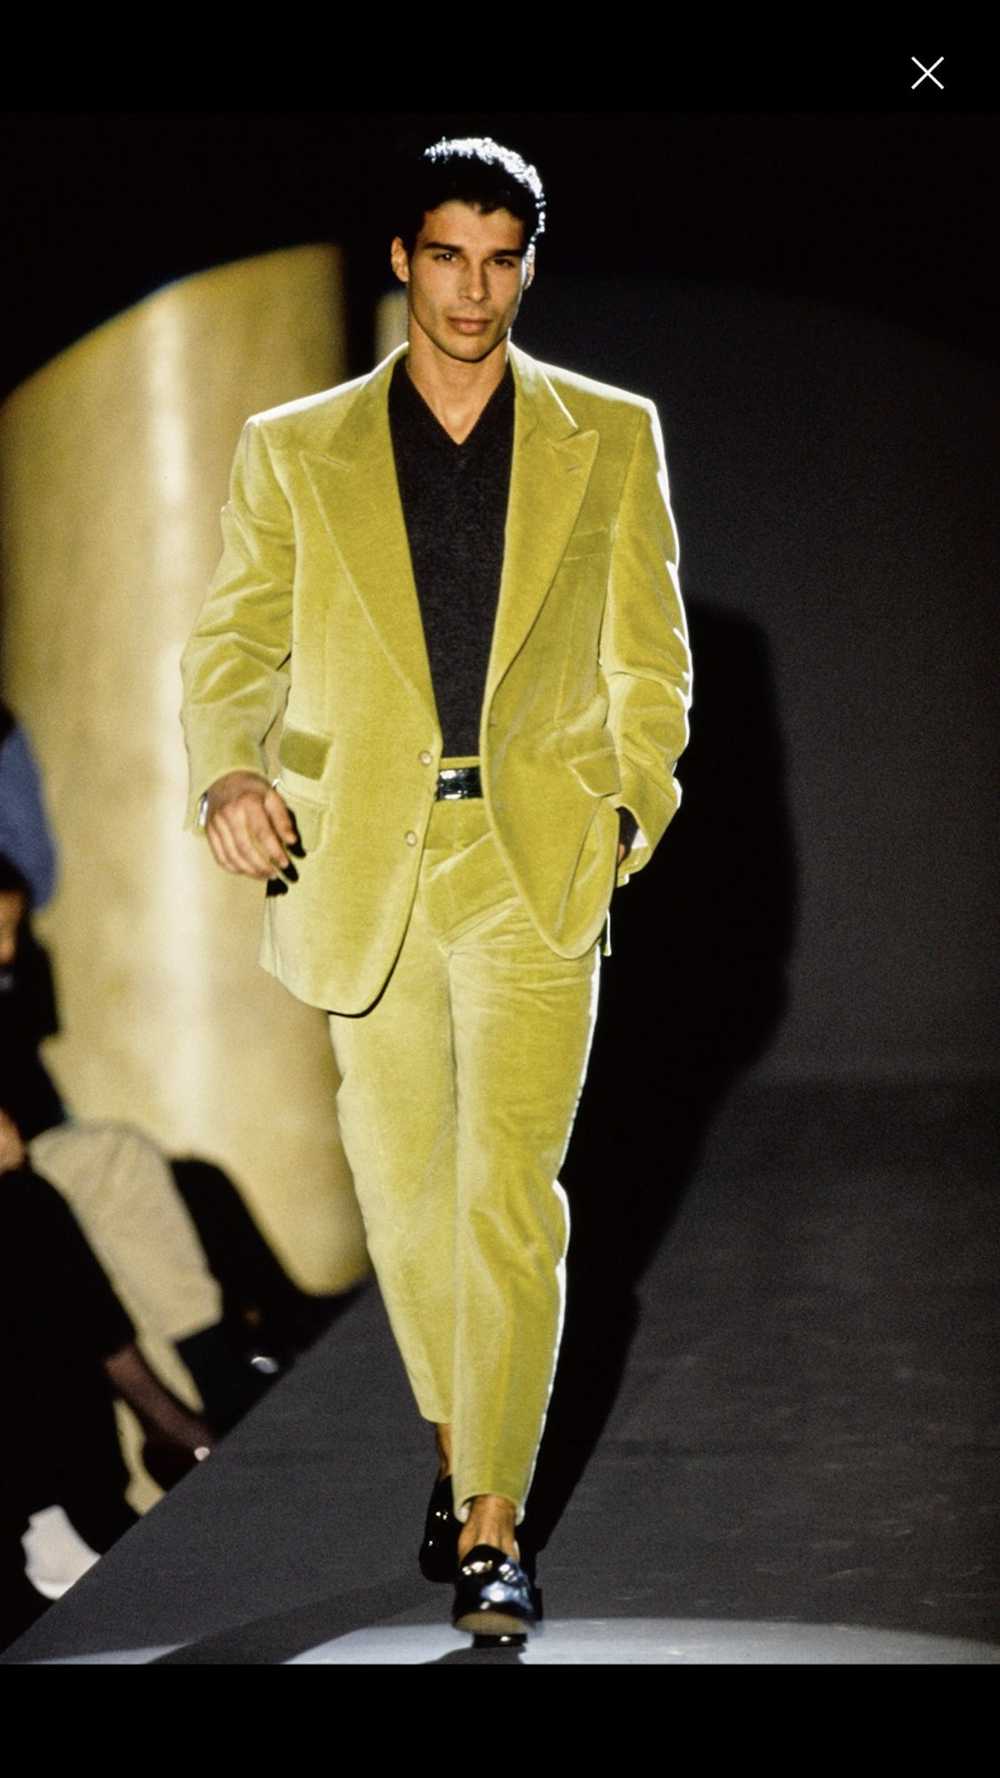 Gucci × Tom Ford Gucci x Tom Ford FW95 Runway Suit - image 1